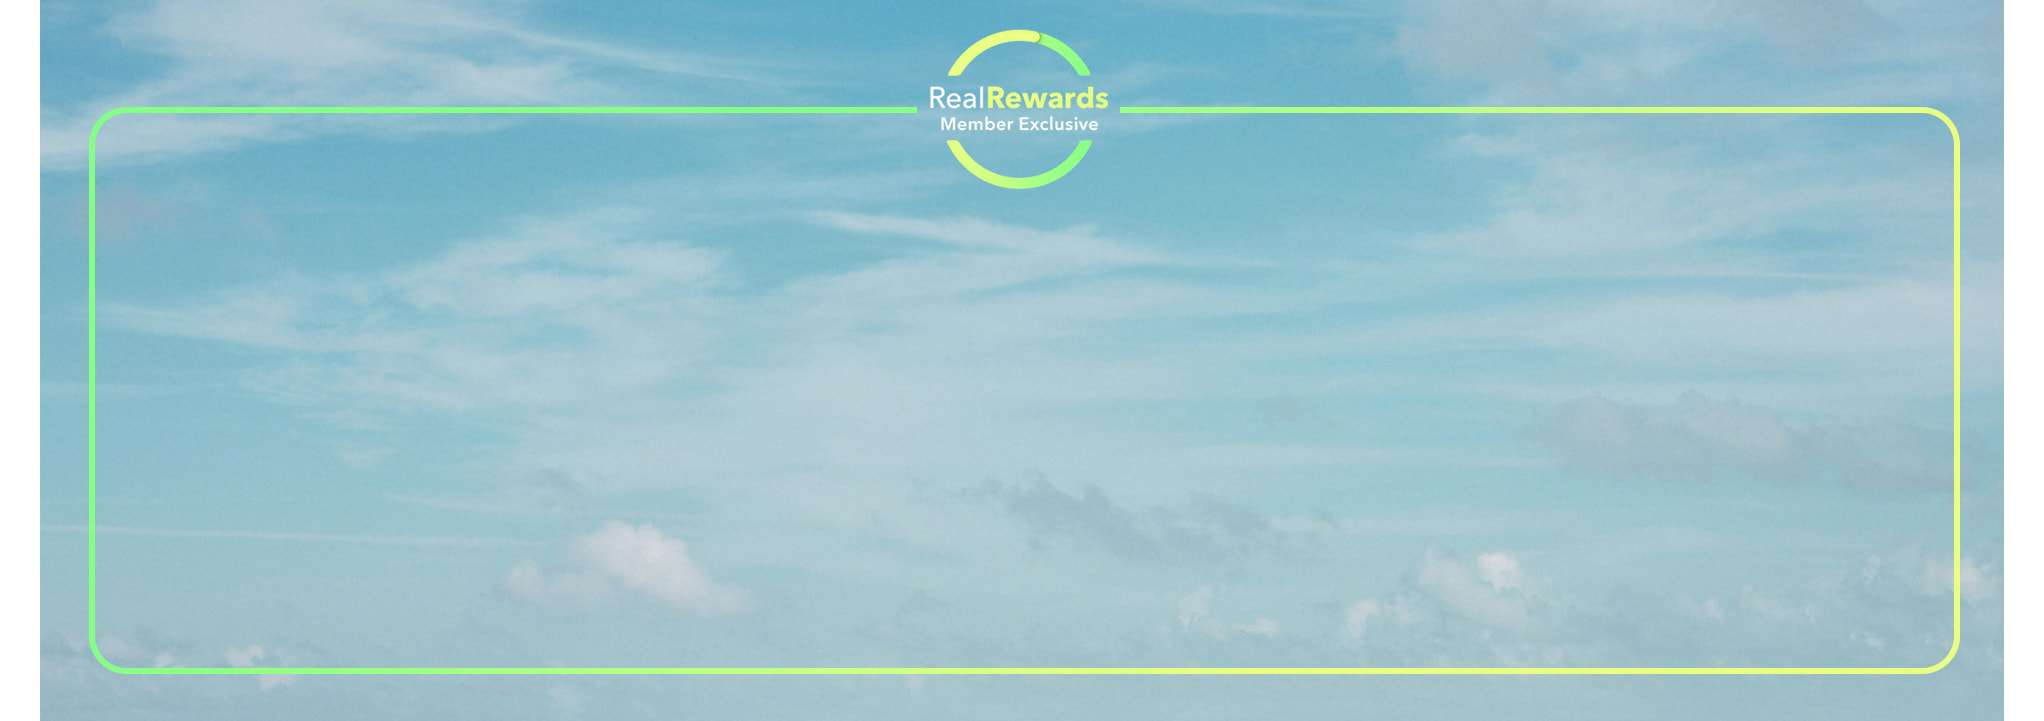 blue sky with clouds and green and yellow border with real rewards logo